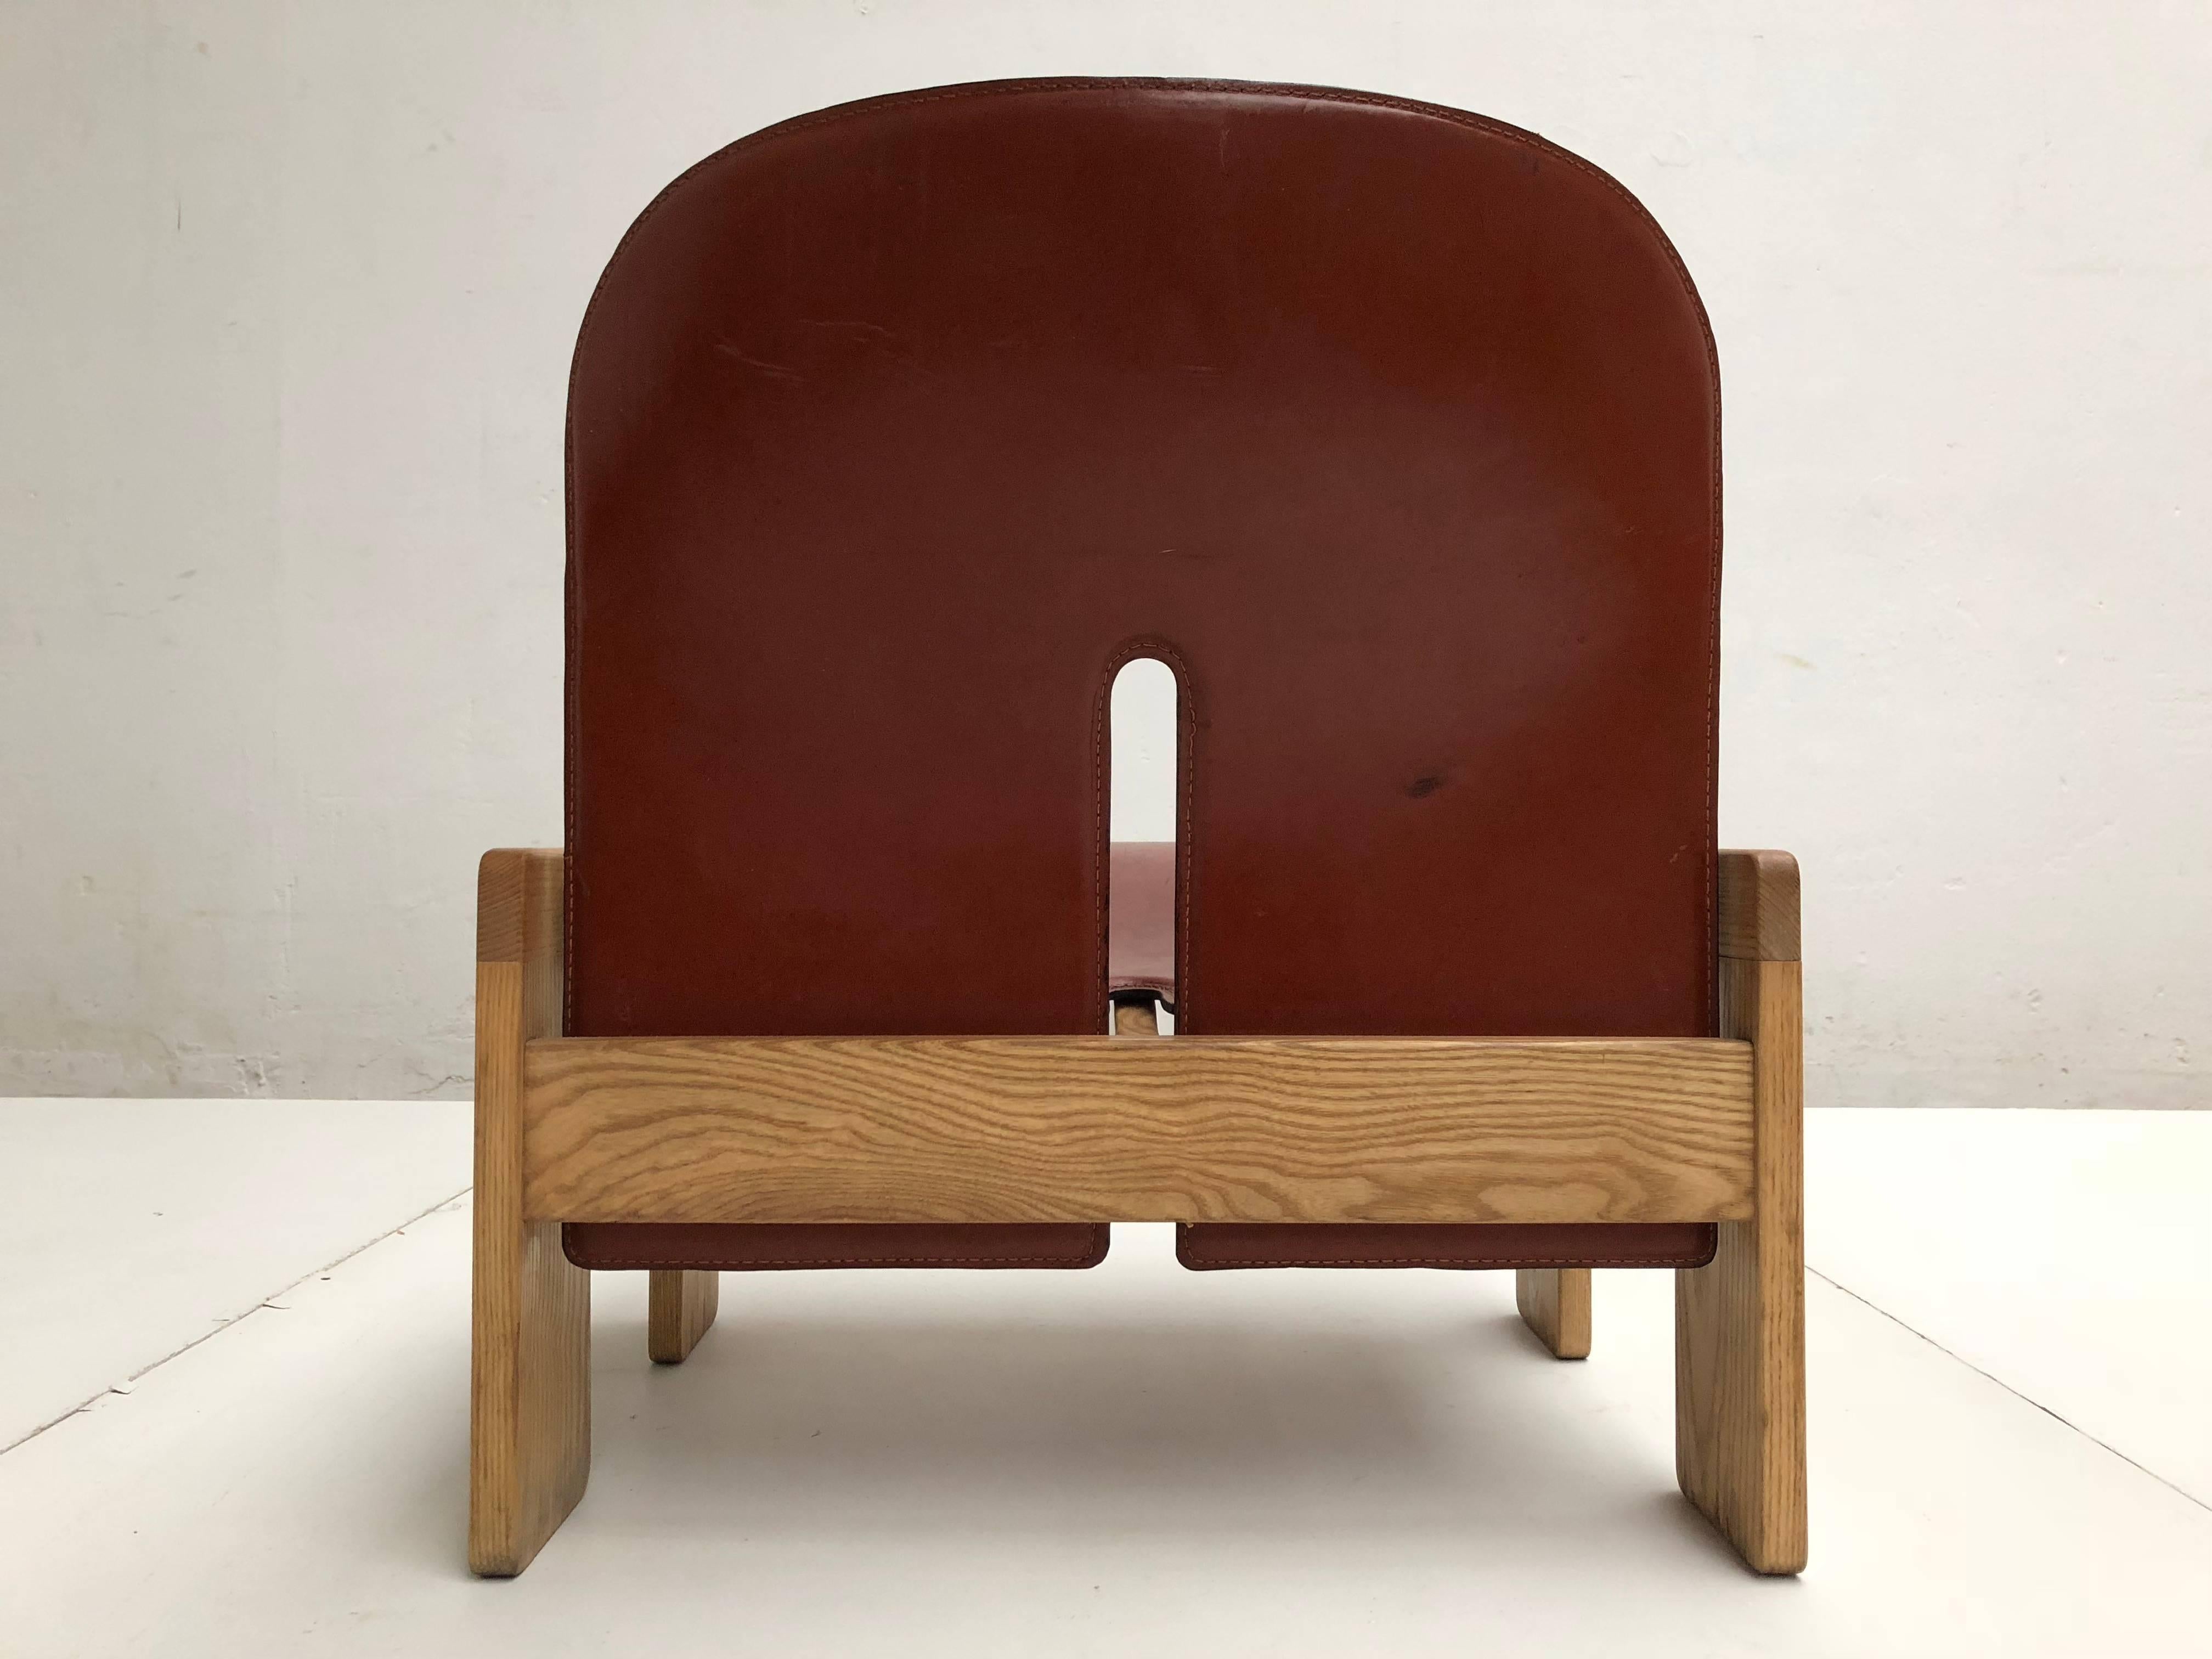 Molded Vintage Leather and Ash Wood 925 Chair by Afra and Tobia Scarpa for Cassina 1966